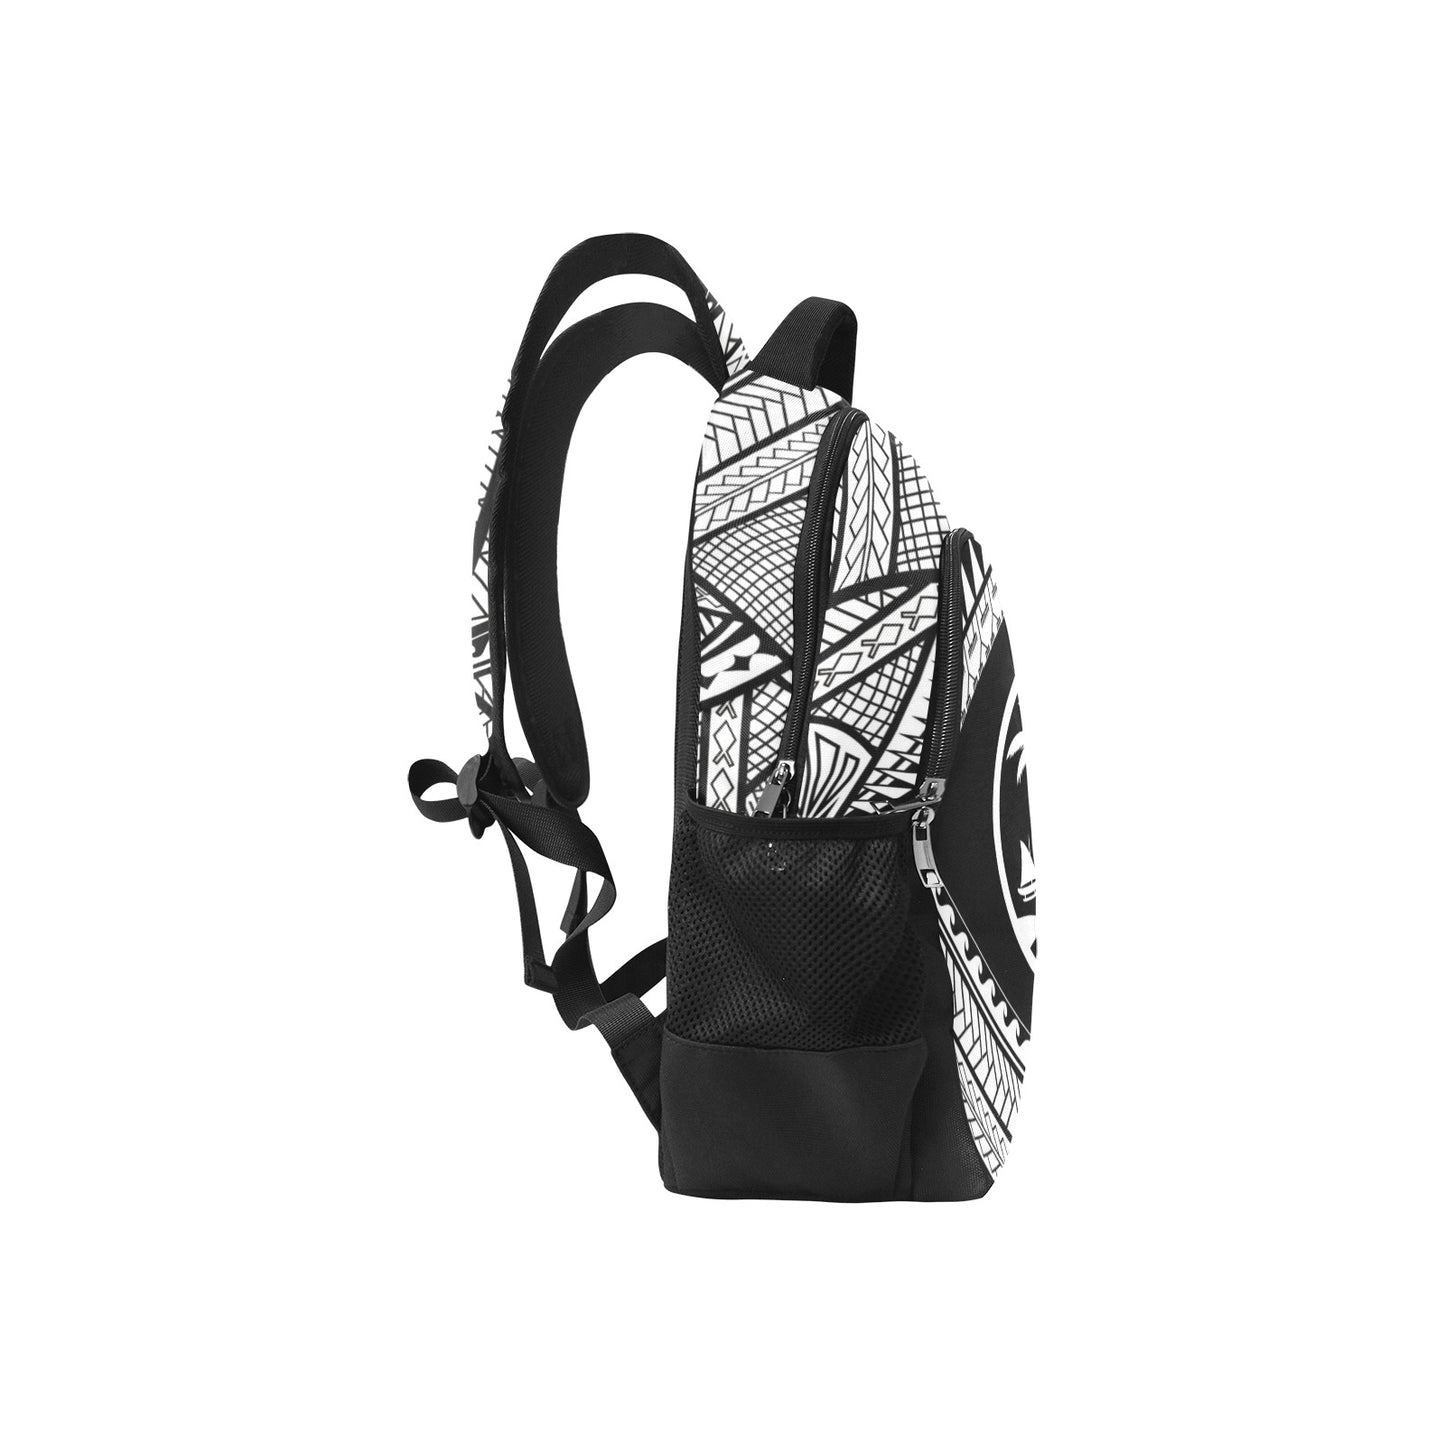 Guahan Tribal Black and White Multifunctional Backpack